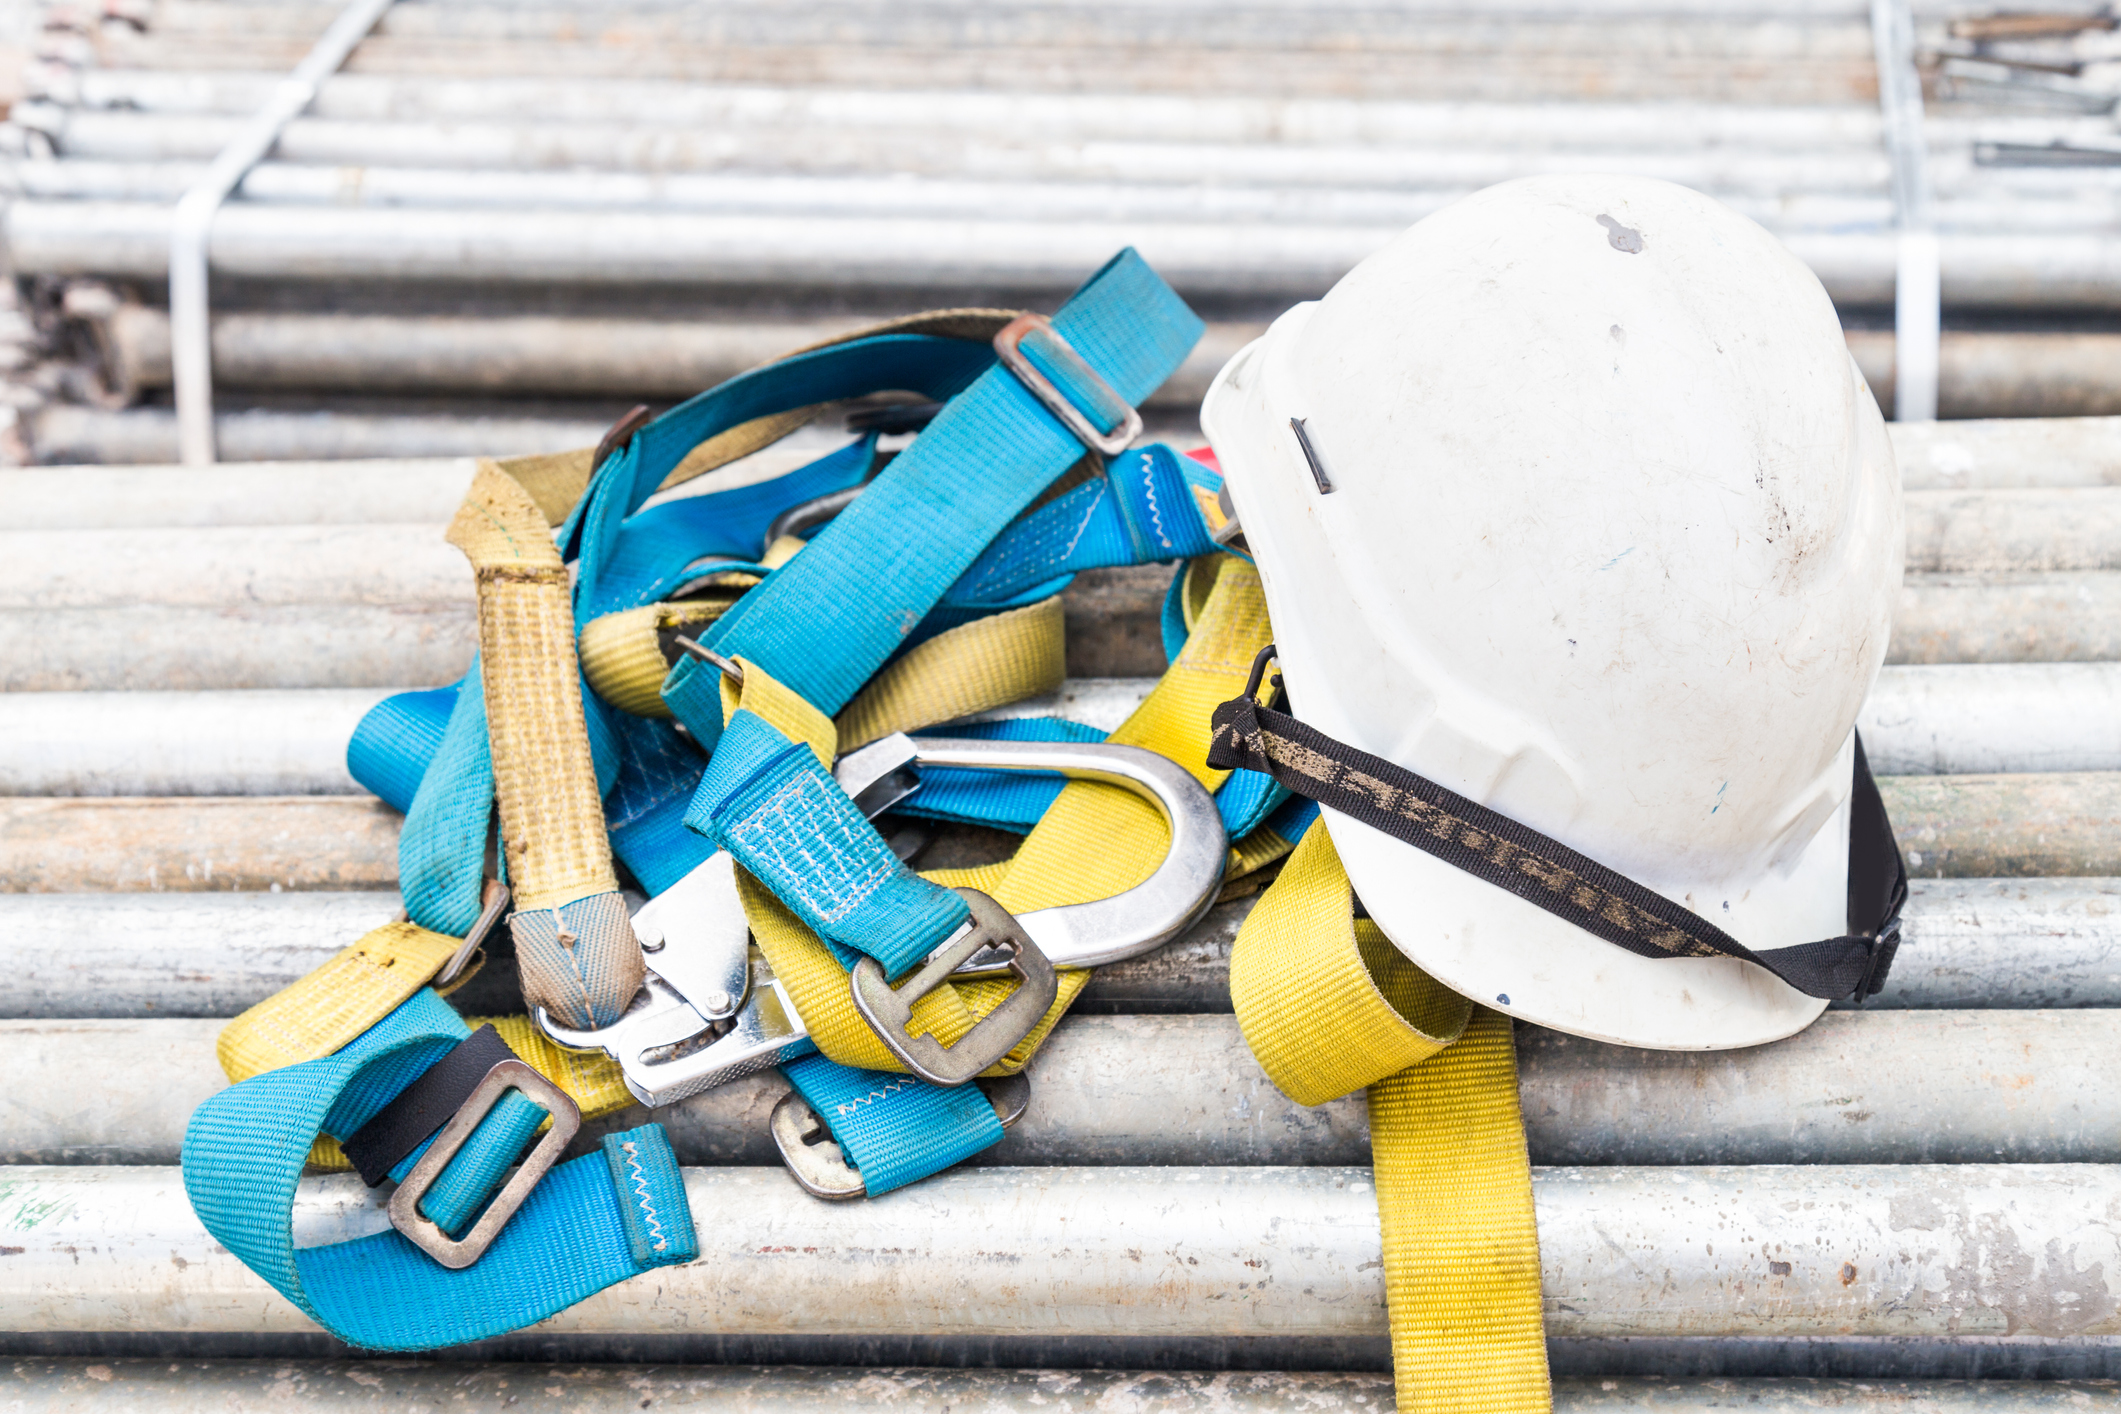 Safety harness and helmet at construction site